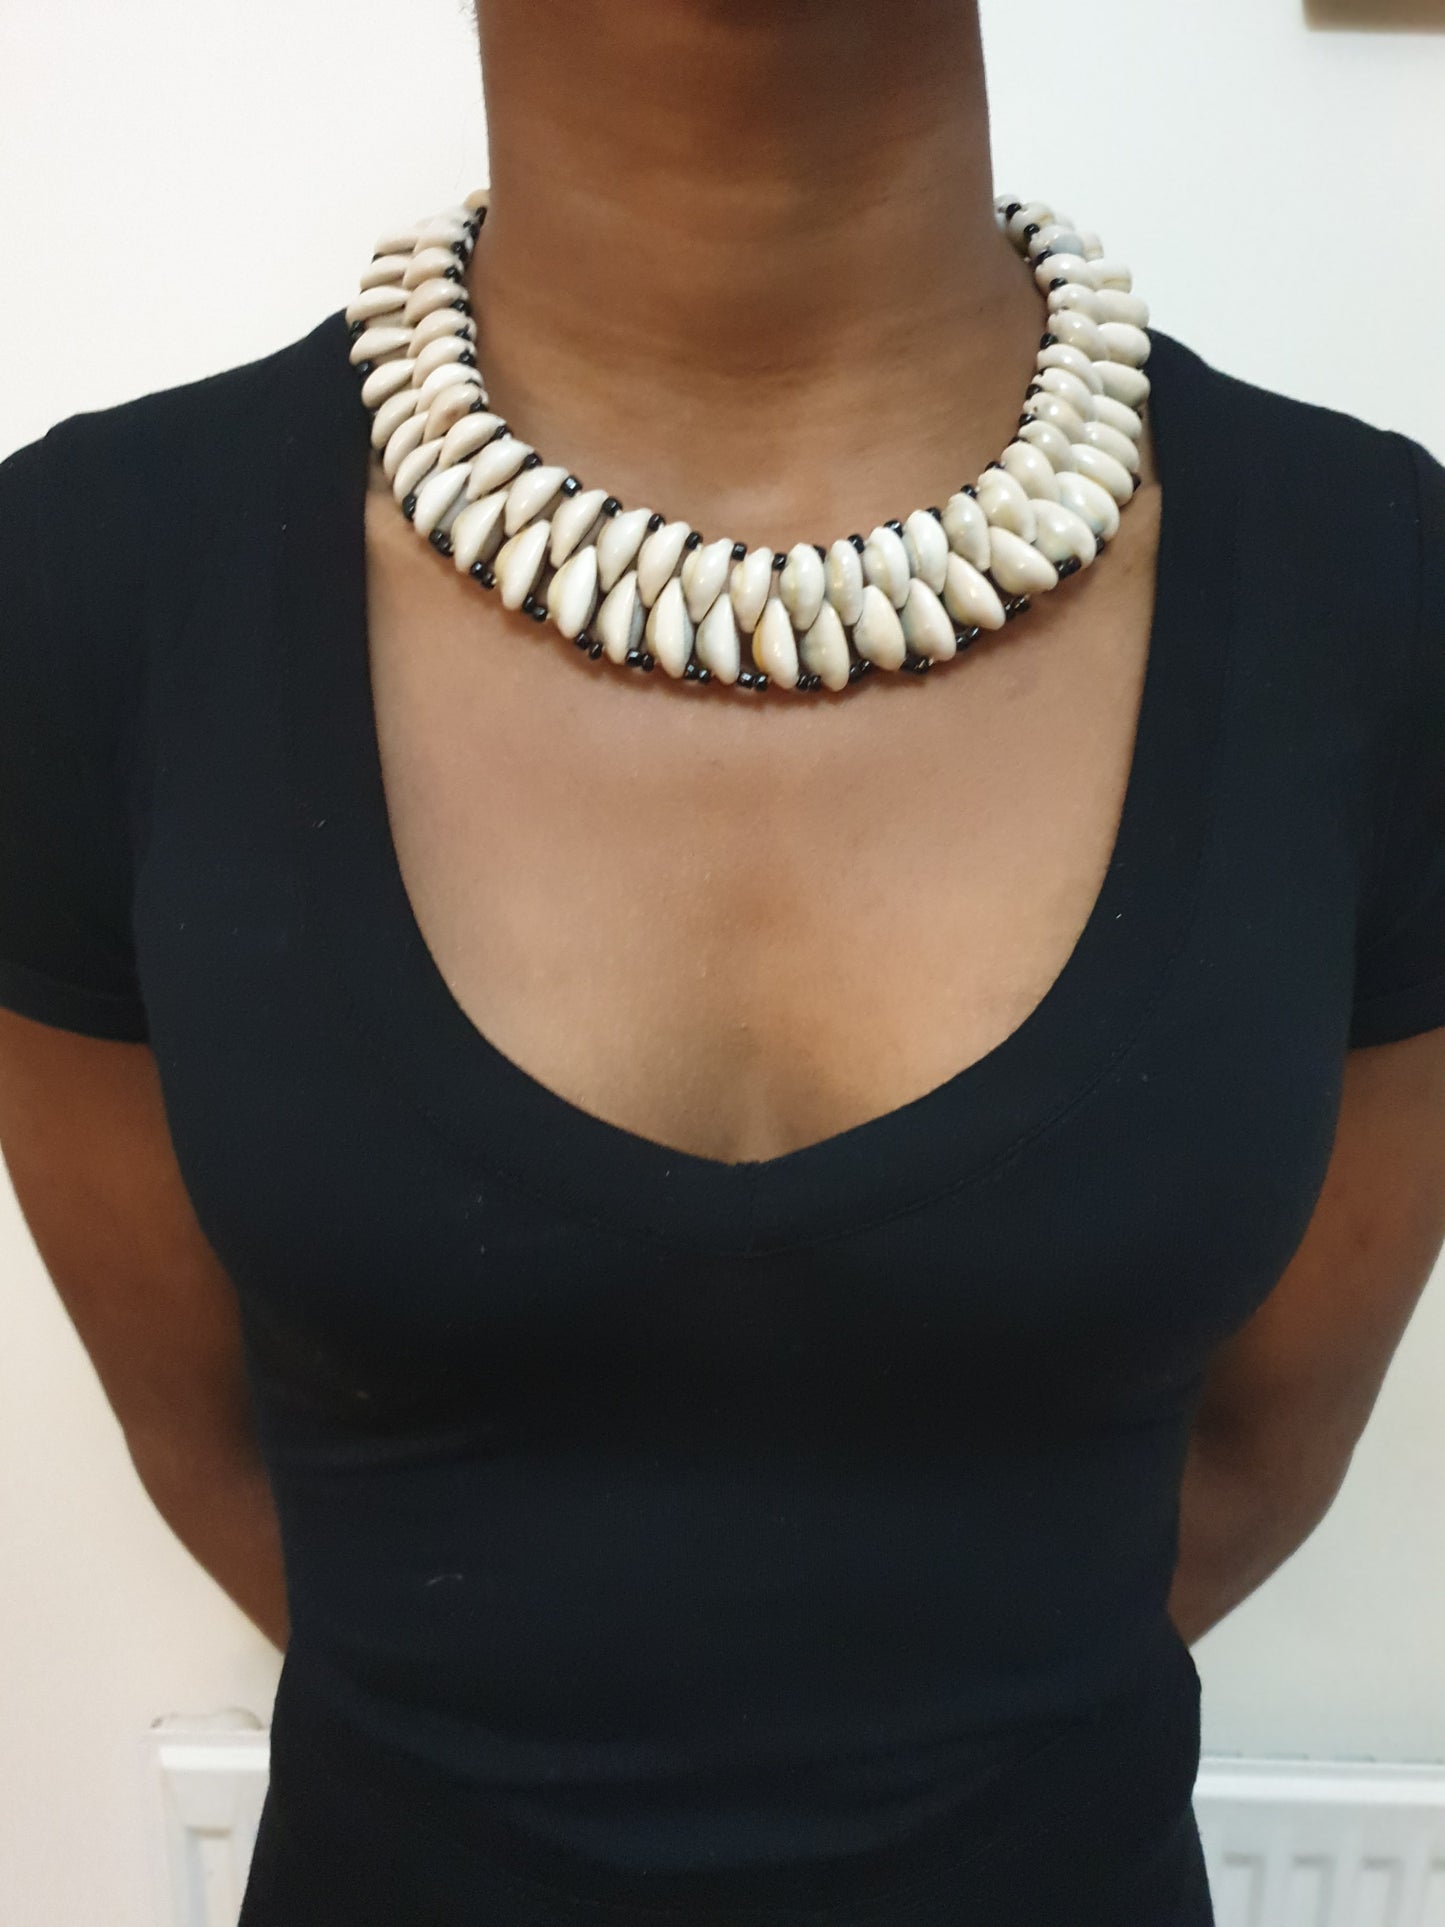 Cowrie shell bead choker necklace